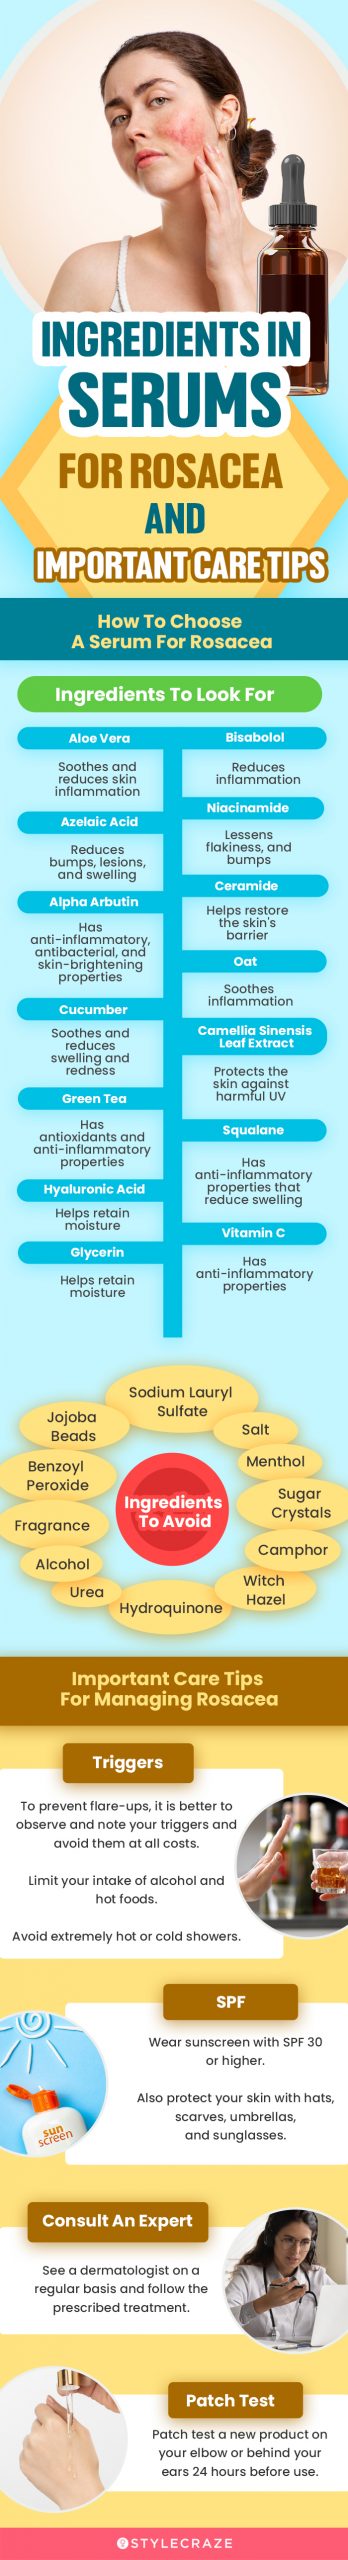 Ingredients In Serums For Rosacea And Important Care Tips